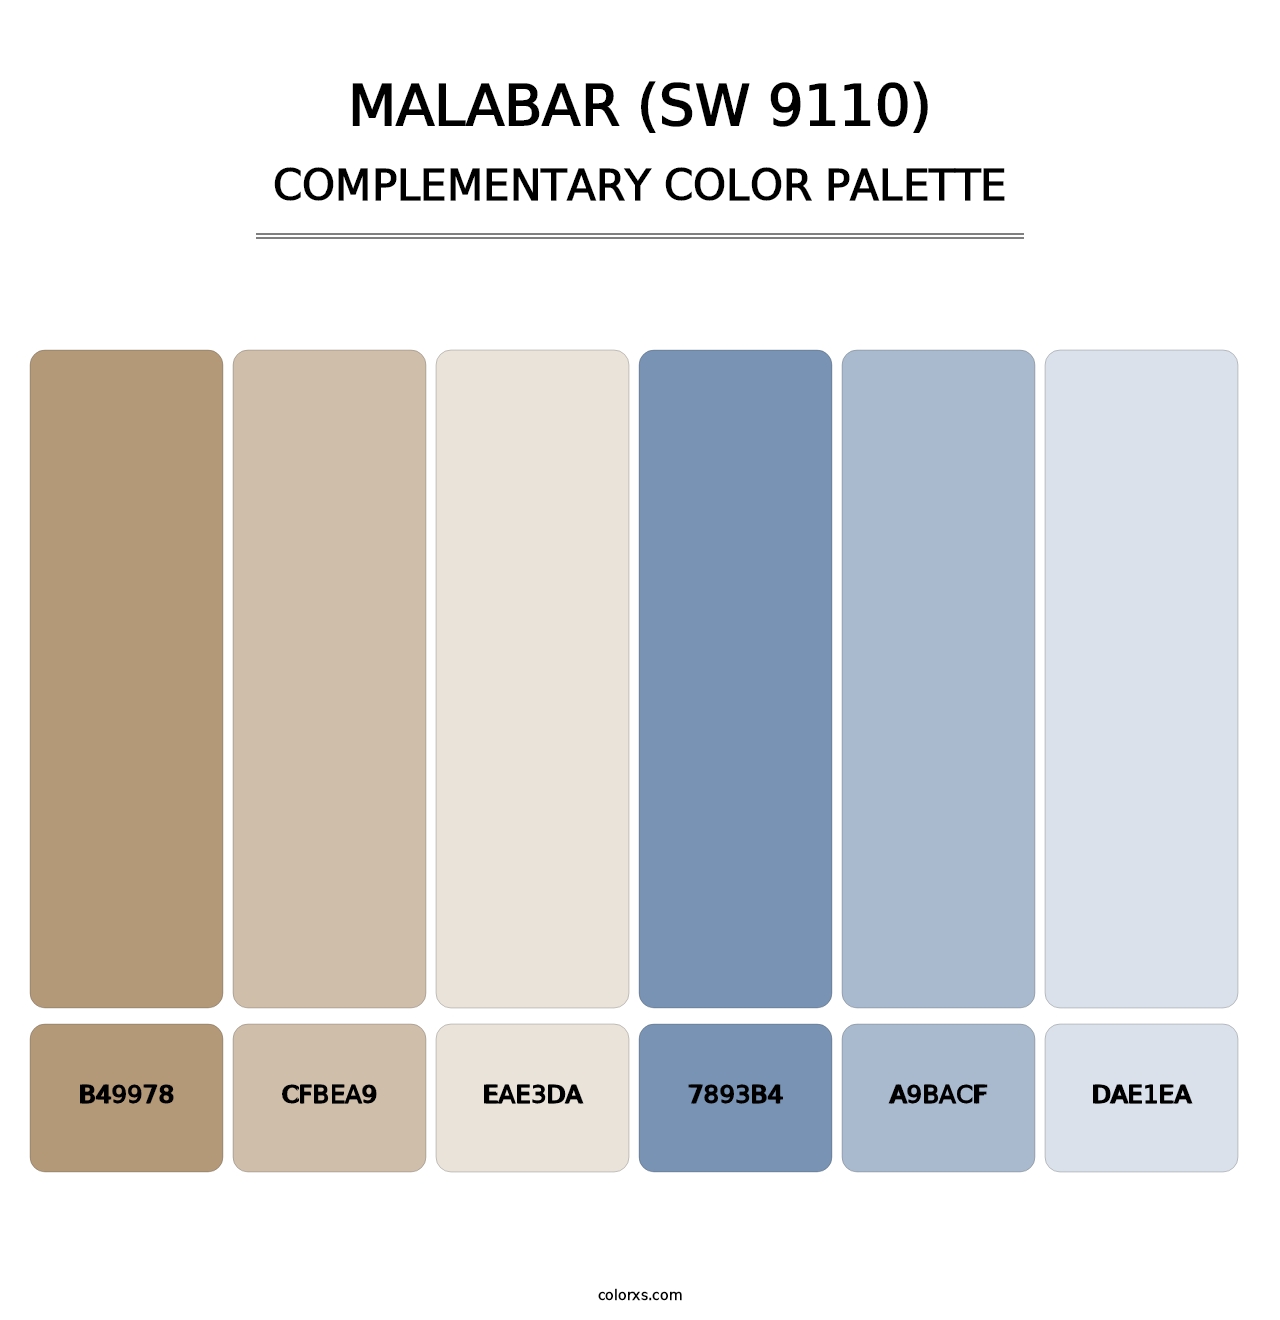 Malabar (SW 9110) - Complementary Color Palette